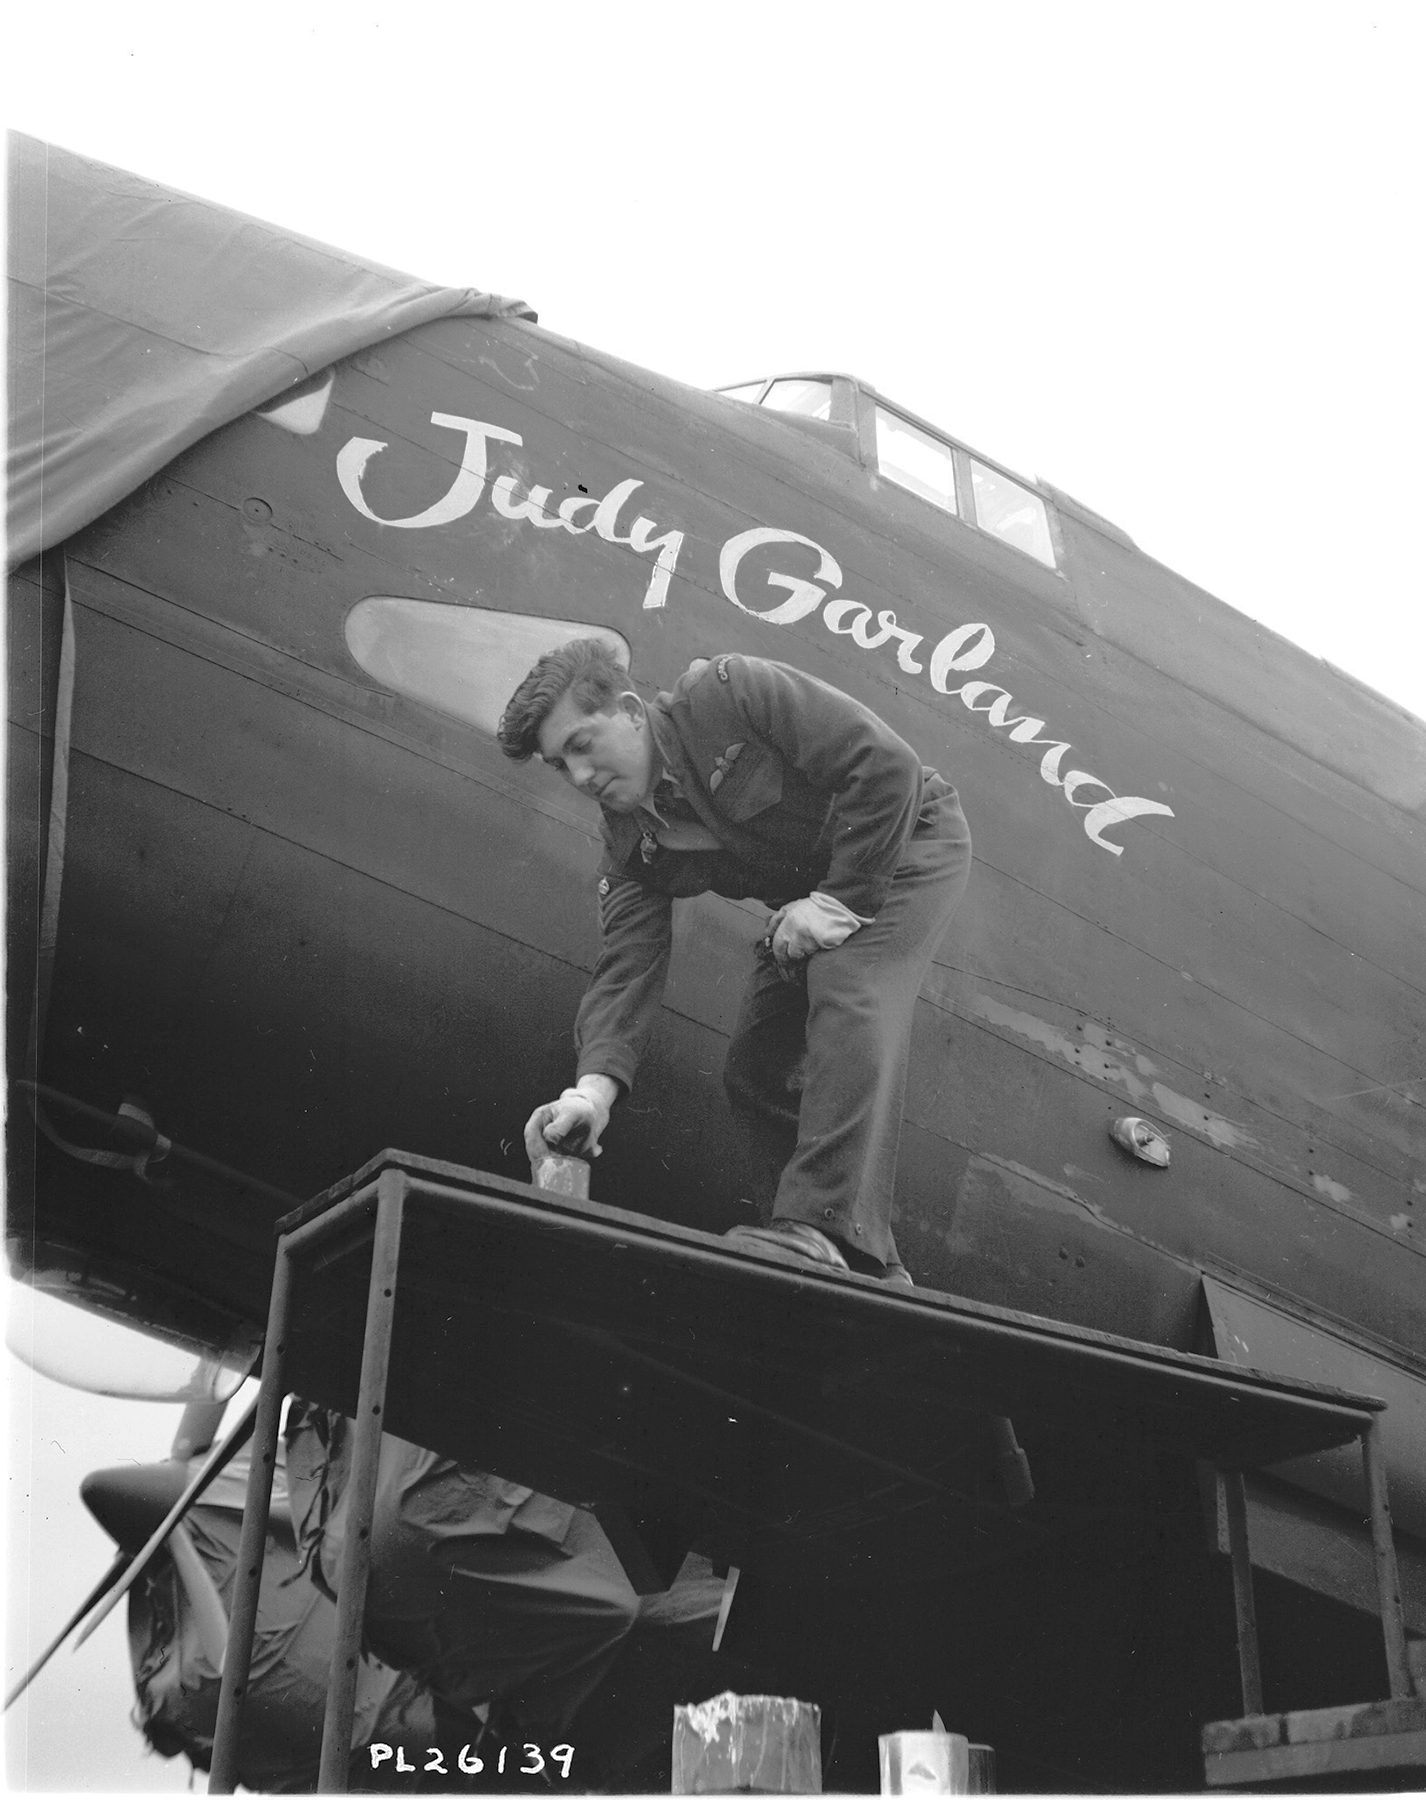 On November 16, 1943, Flight Sergeant J. Mawson of Kingston, Ontario paints a design displaying the name of film star Judy Garland on a 427 Squadron aircraft. On May 24, 1943, American film giant Metro-Goldwyn-Mayer (MGM) had adopted 427 Squadron and allowed the names of such stars as Judy Garland, Lana Turner and Joan Crawford to be displayed on the squadron’s aircraft. As legend has it, MGM provided all 427 Squadron “Lions: with a lifetime pass to its theaters across North America. In addition, MGM presented a bronze lion to the squadron. This gift and the affiliation with the MGM lion mascot strengthened the squadron's Lion nickname. PHOTO: DND Archives, PL-26139